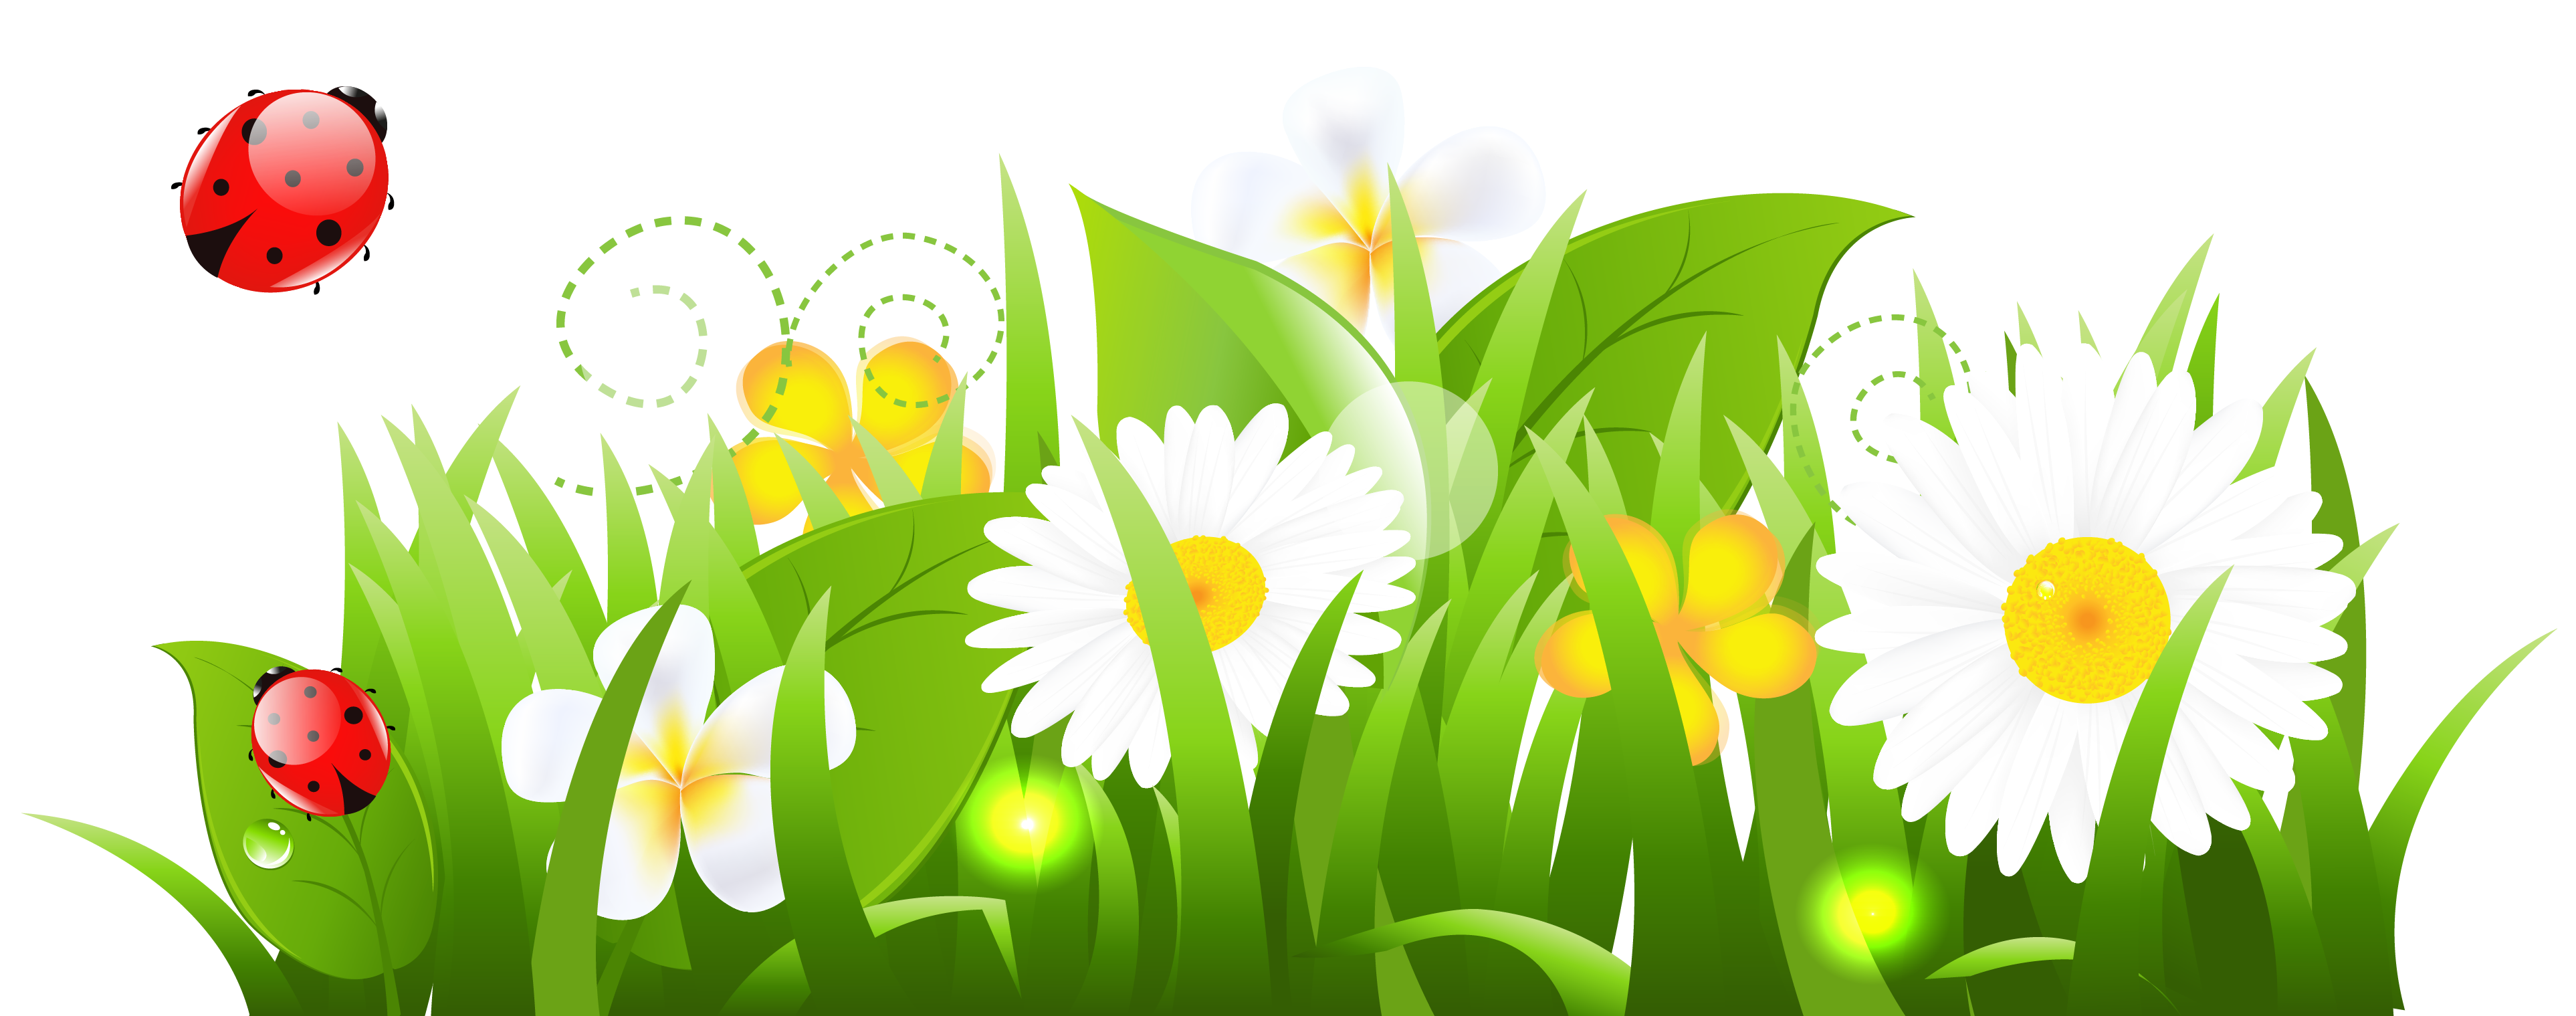 Grass and flowers clipart